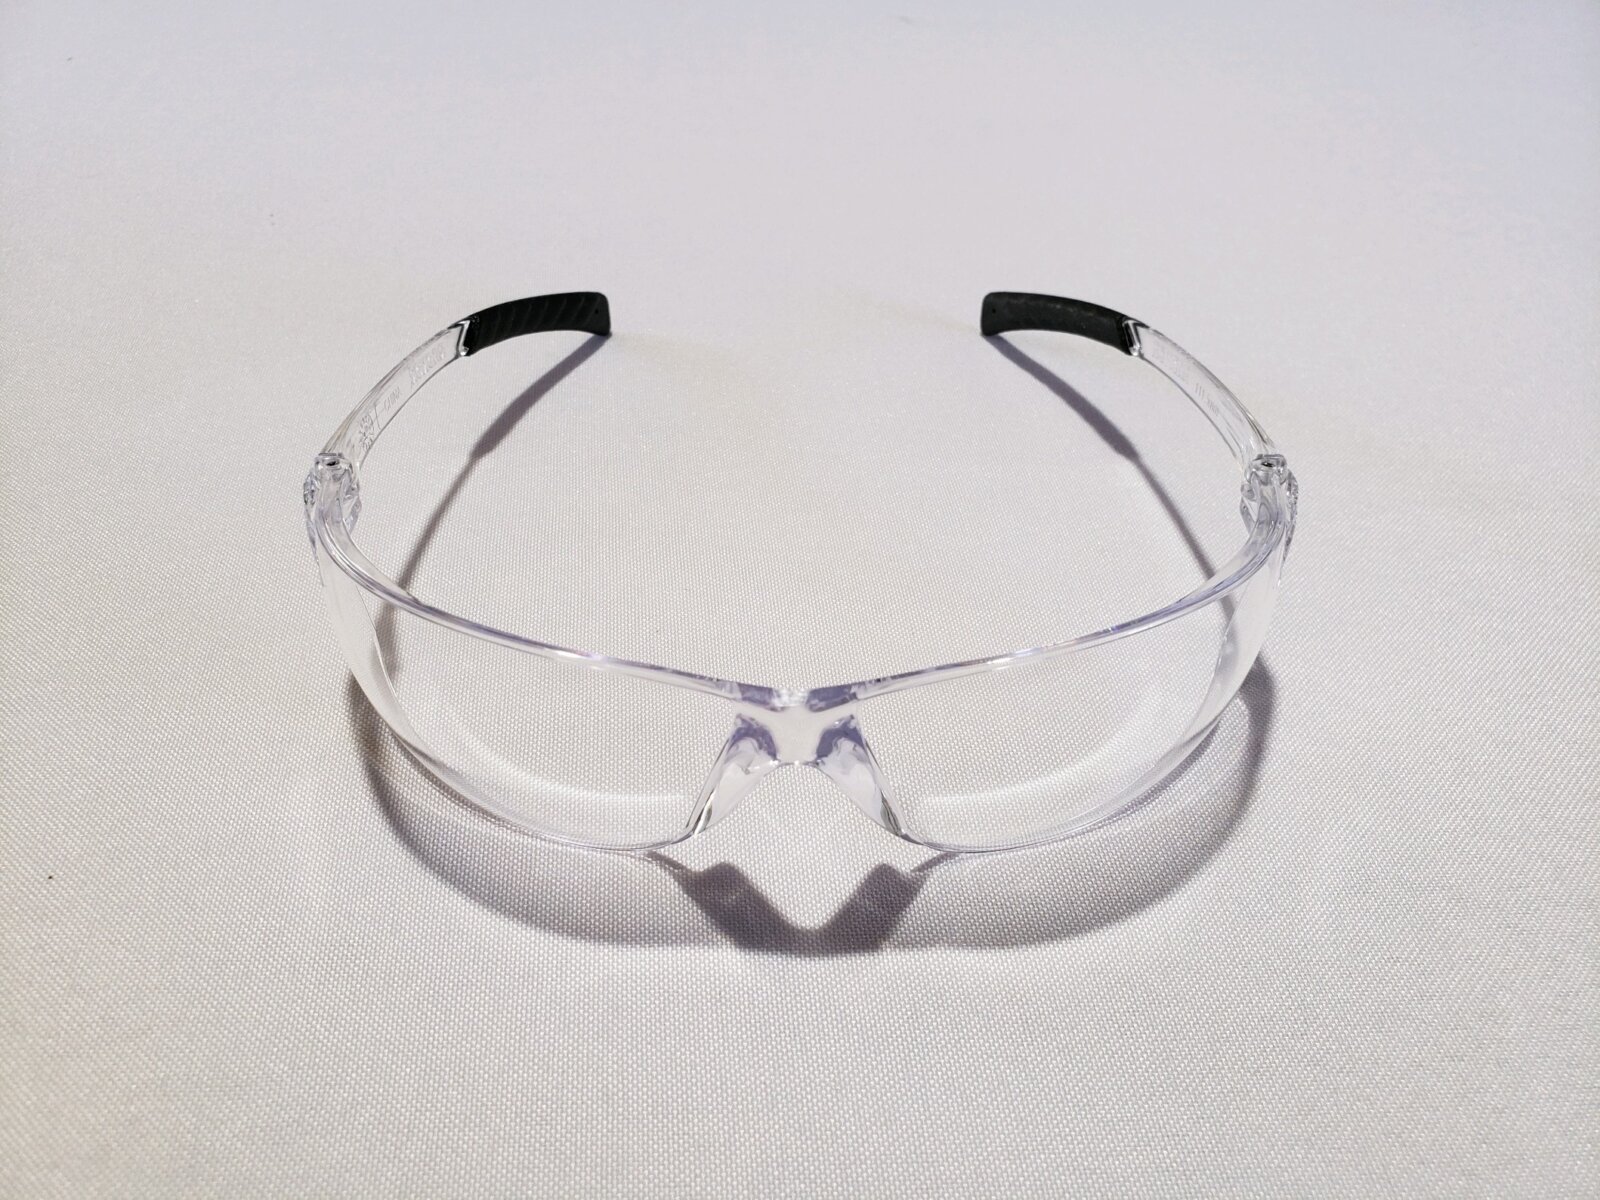 Safety Glasses, Clear Lens